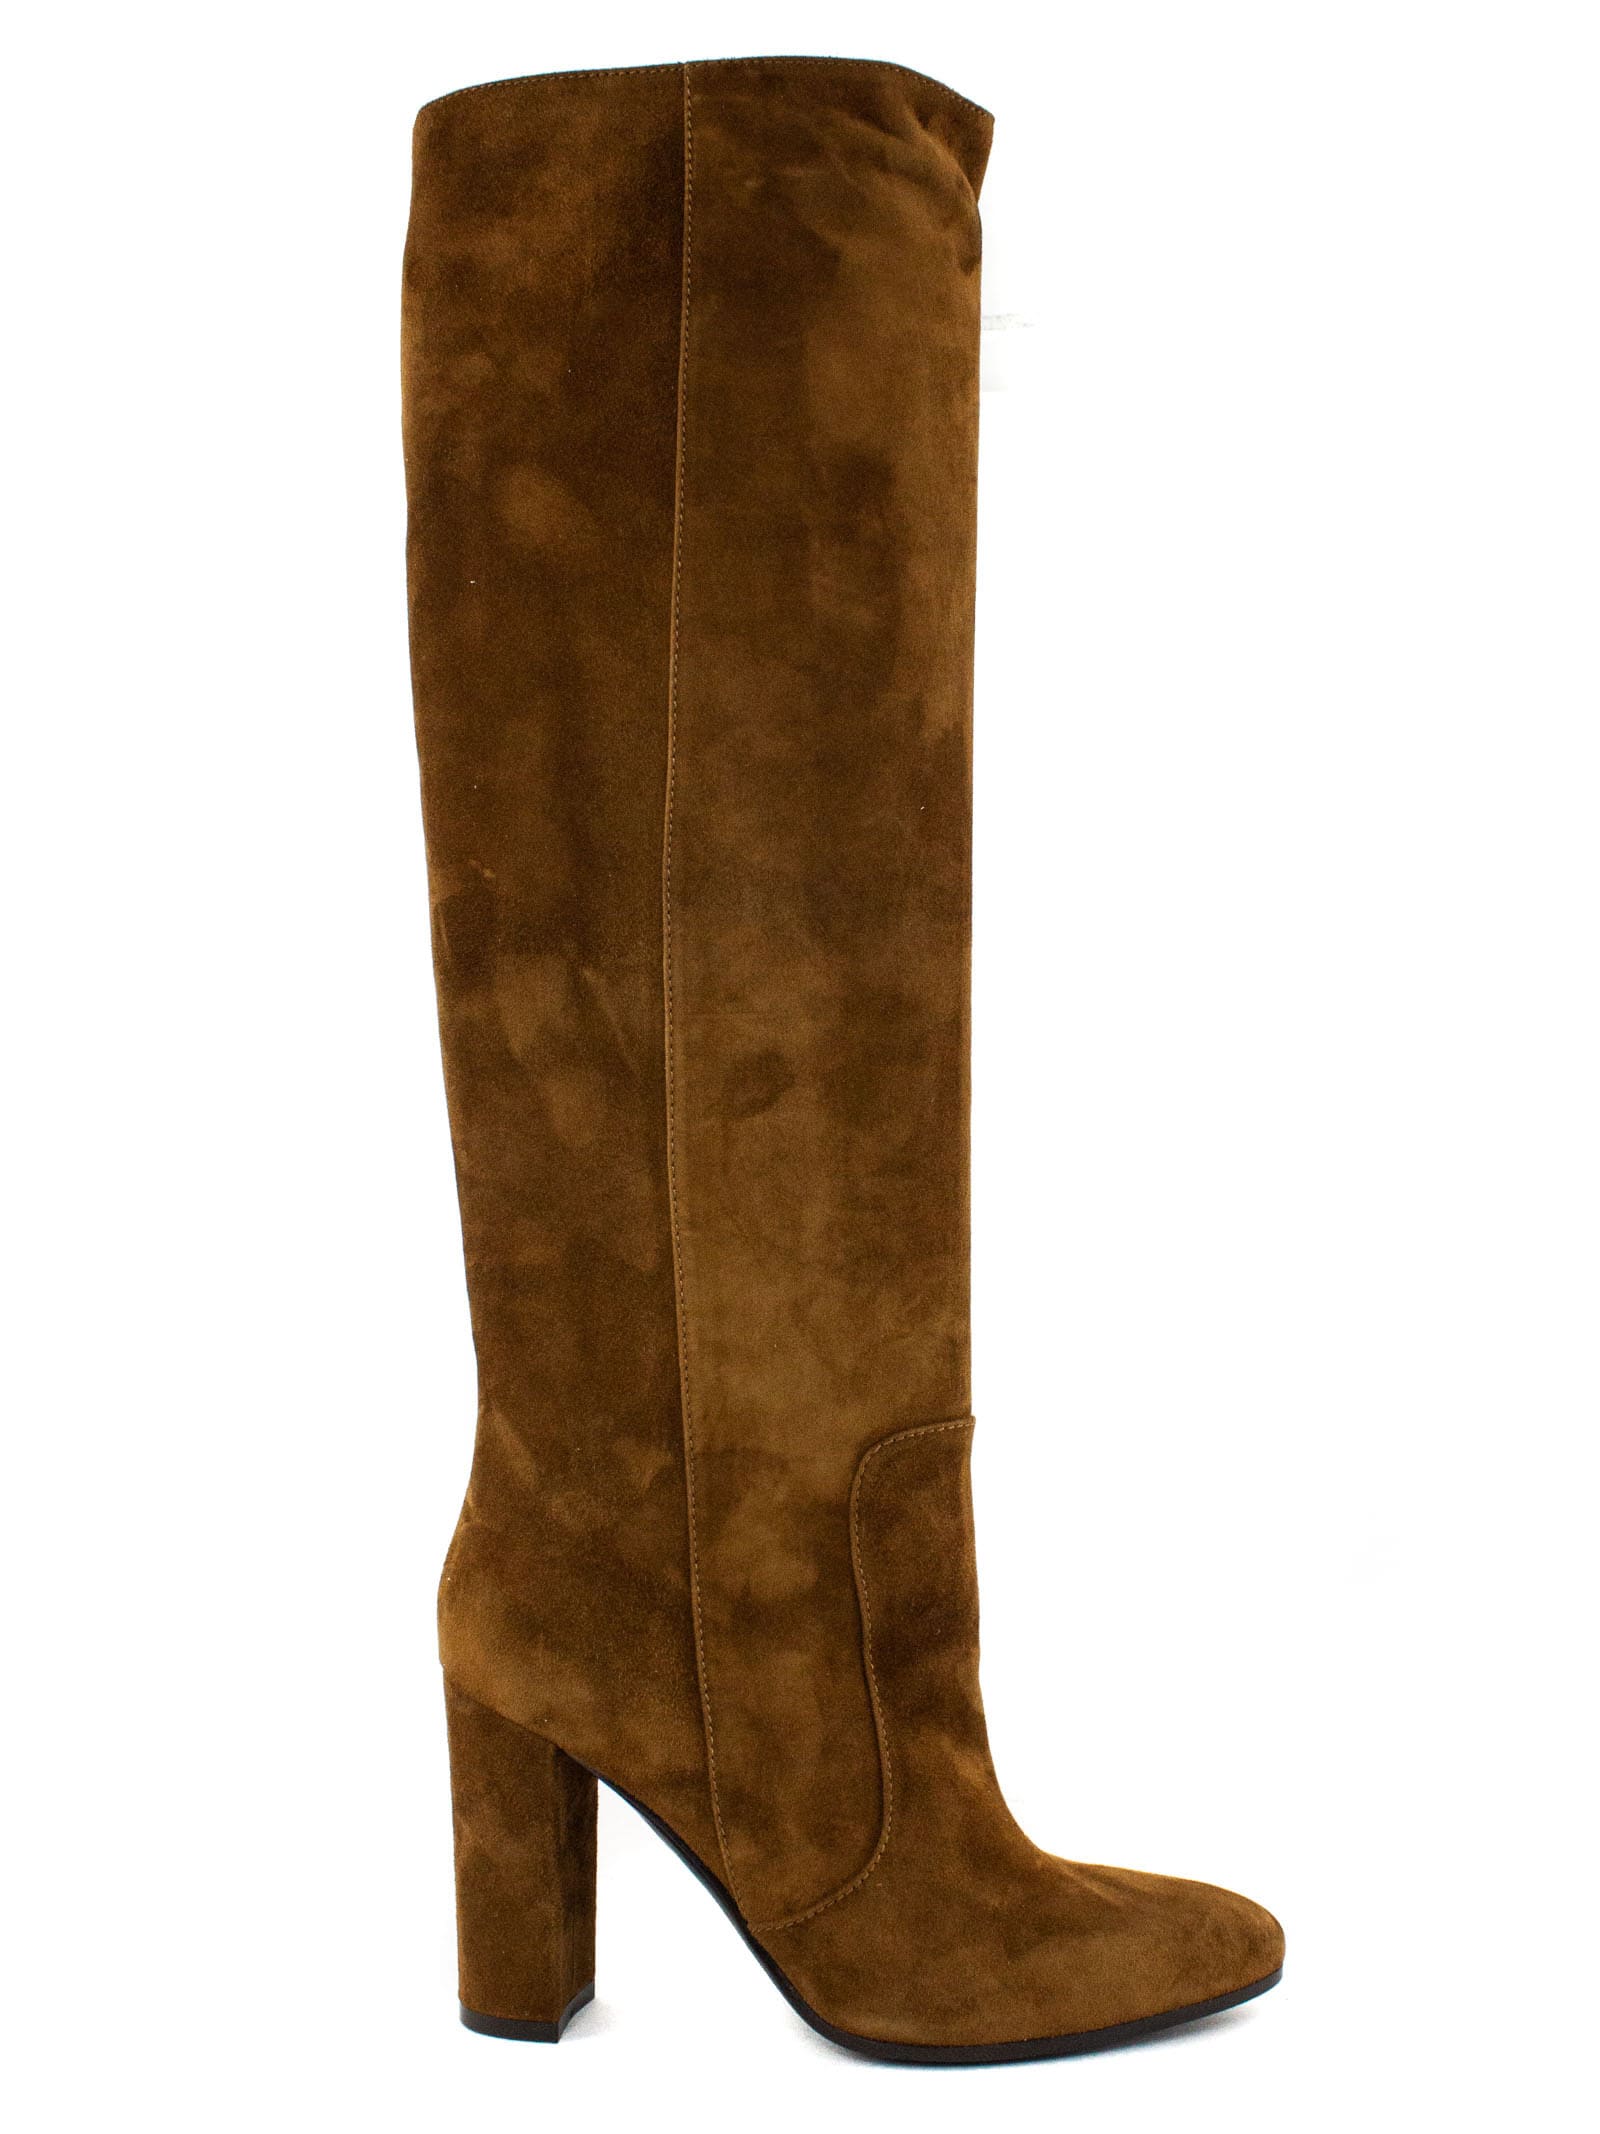 Via Roma 15 Brown Suede High Boot